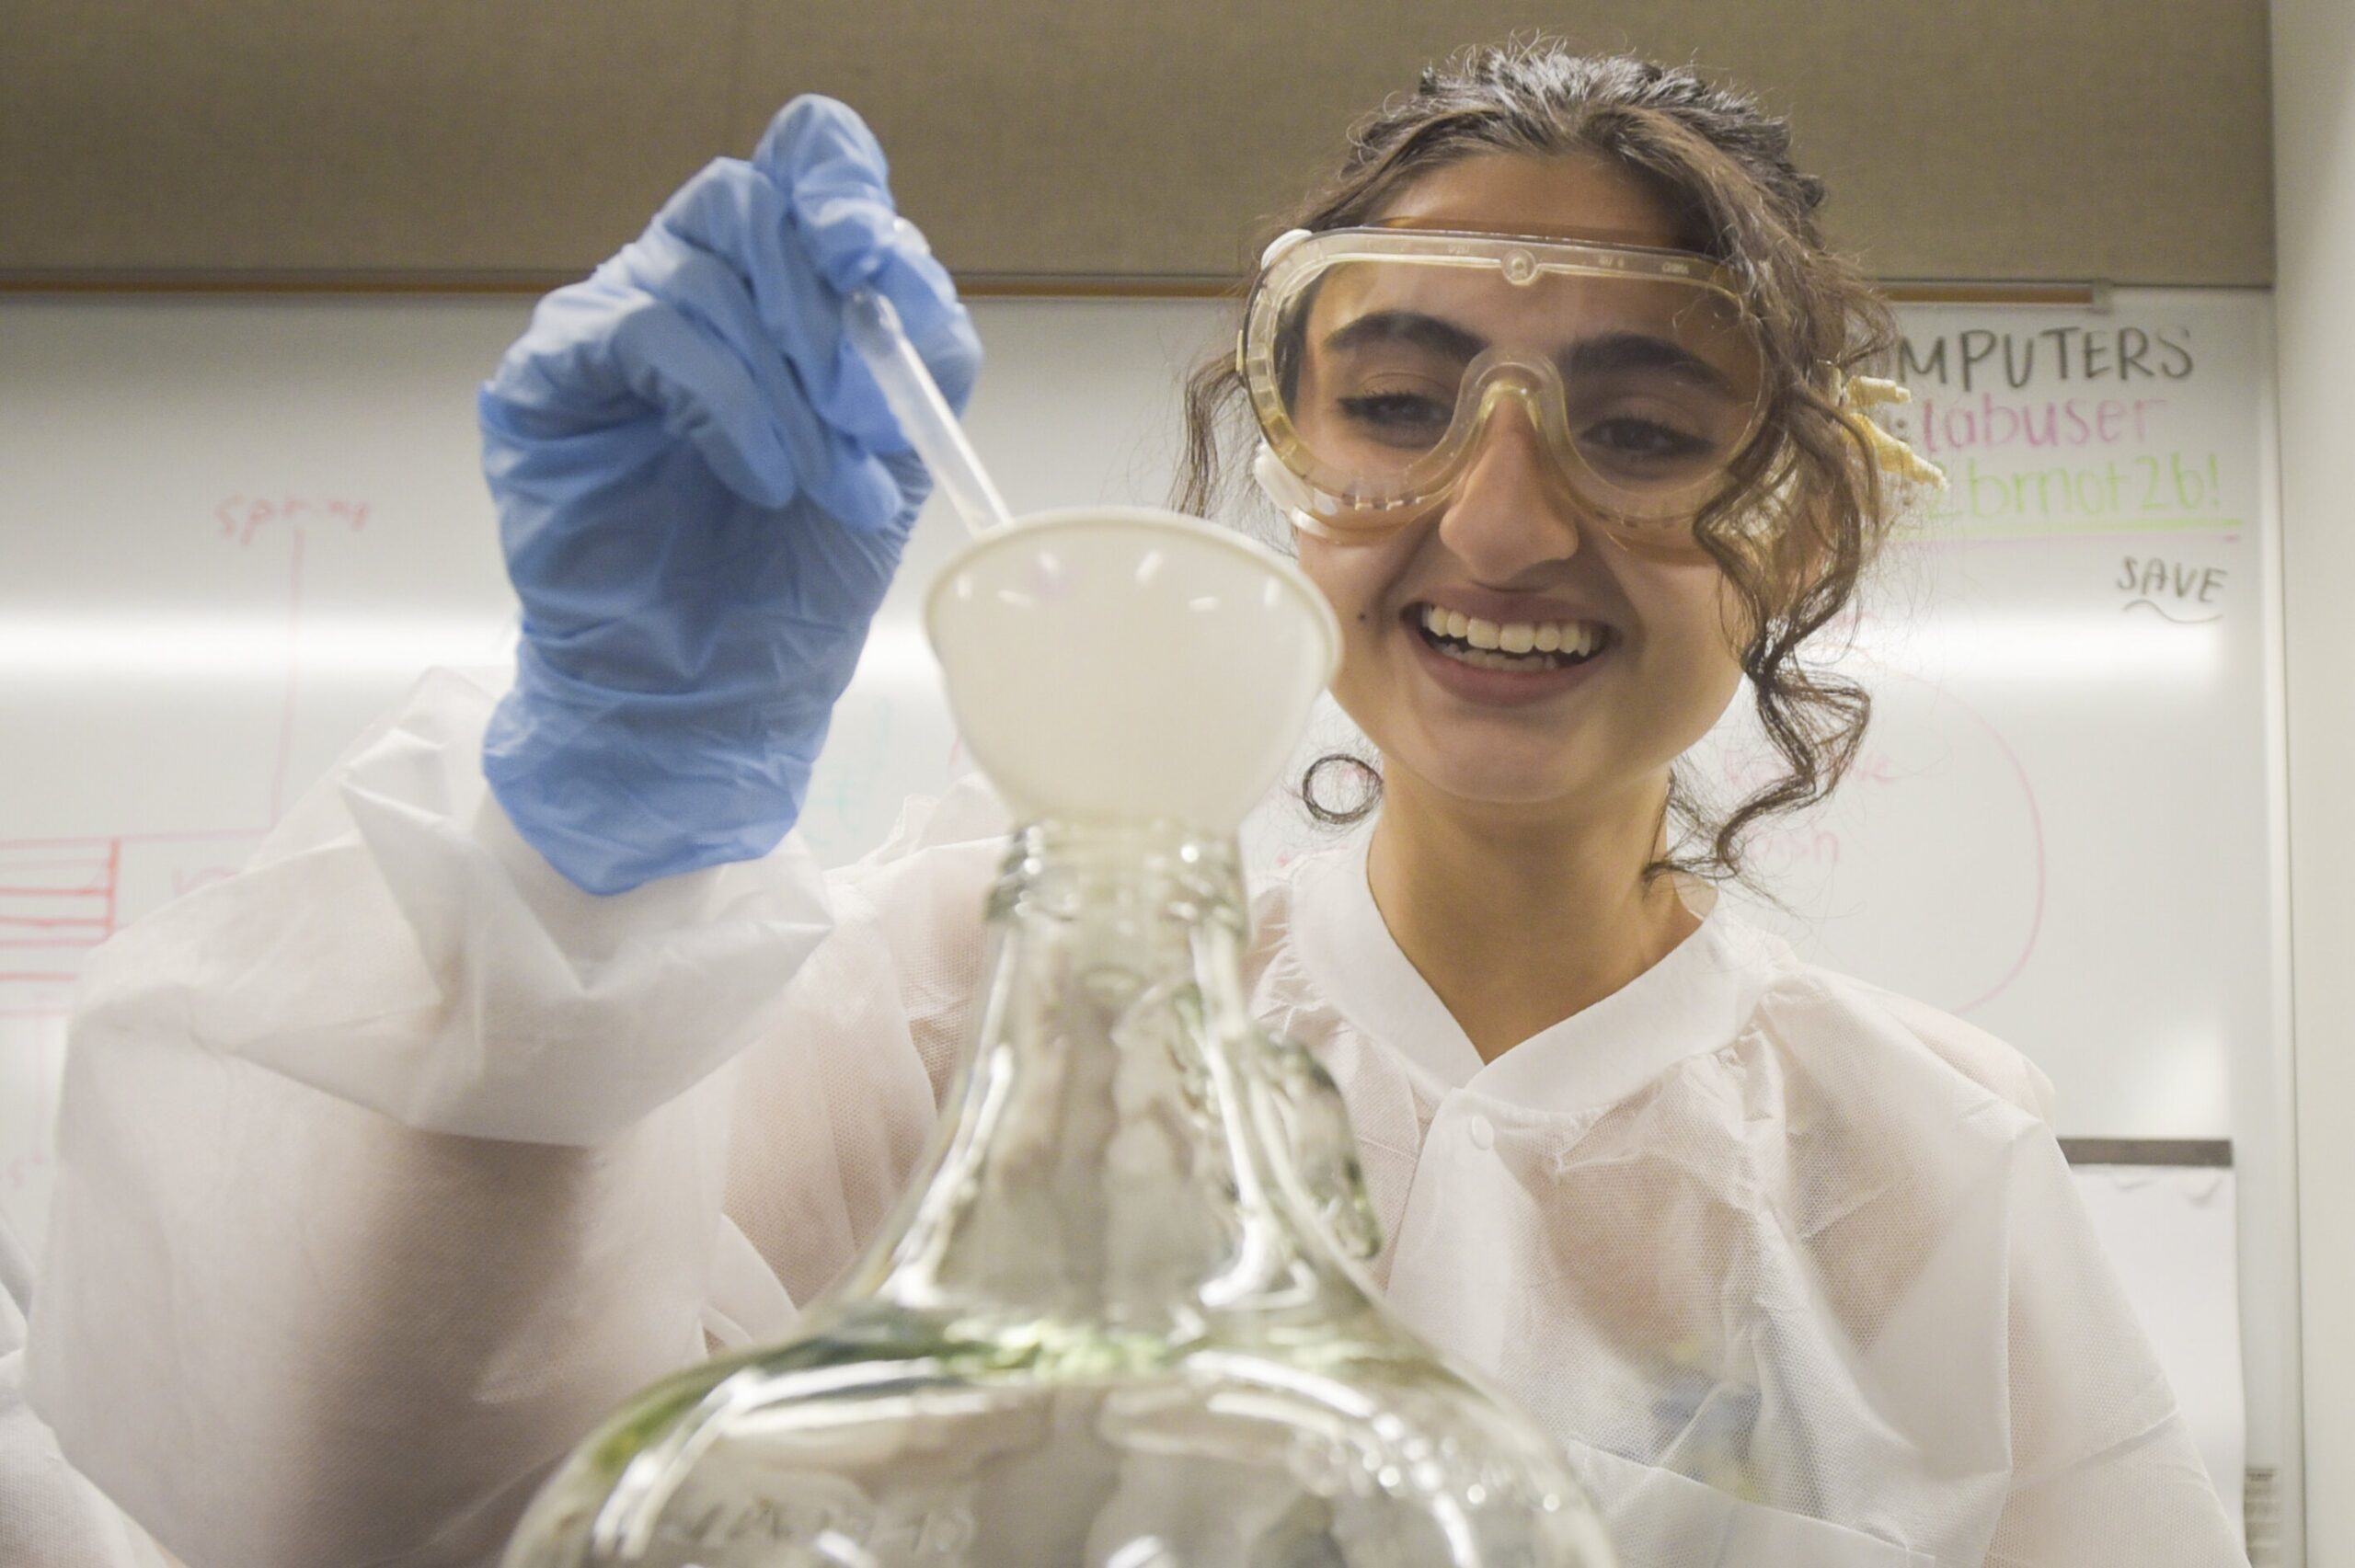 Student in lab attire smiling while pipetting liquid into glass jar